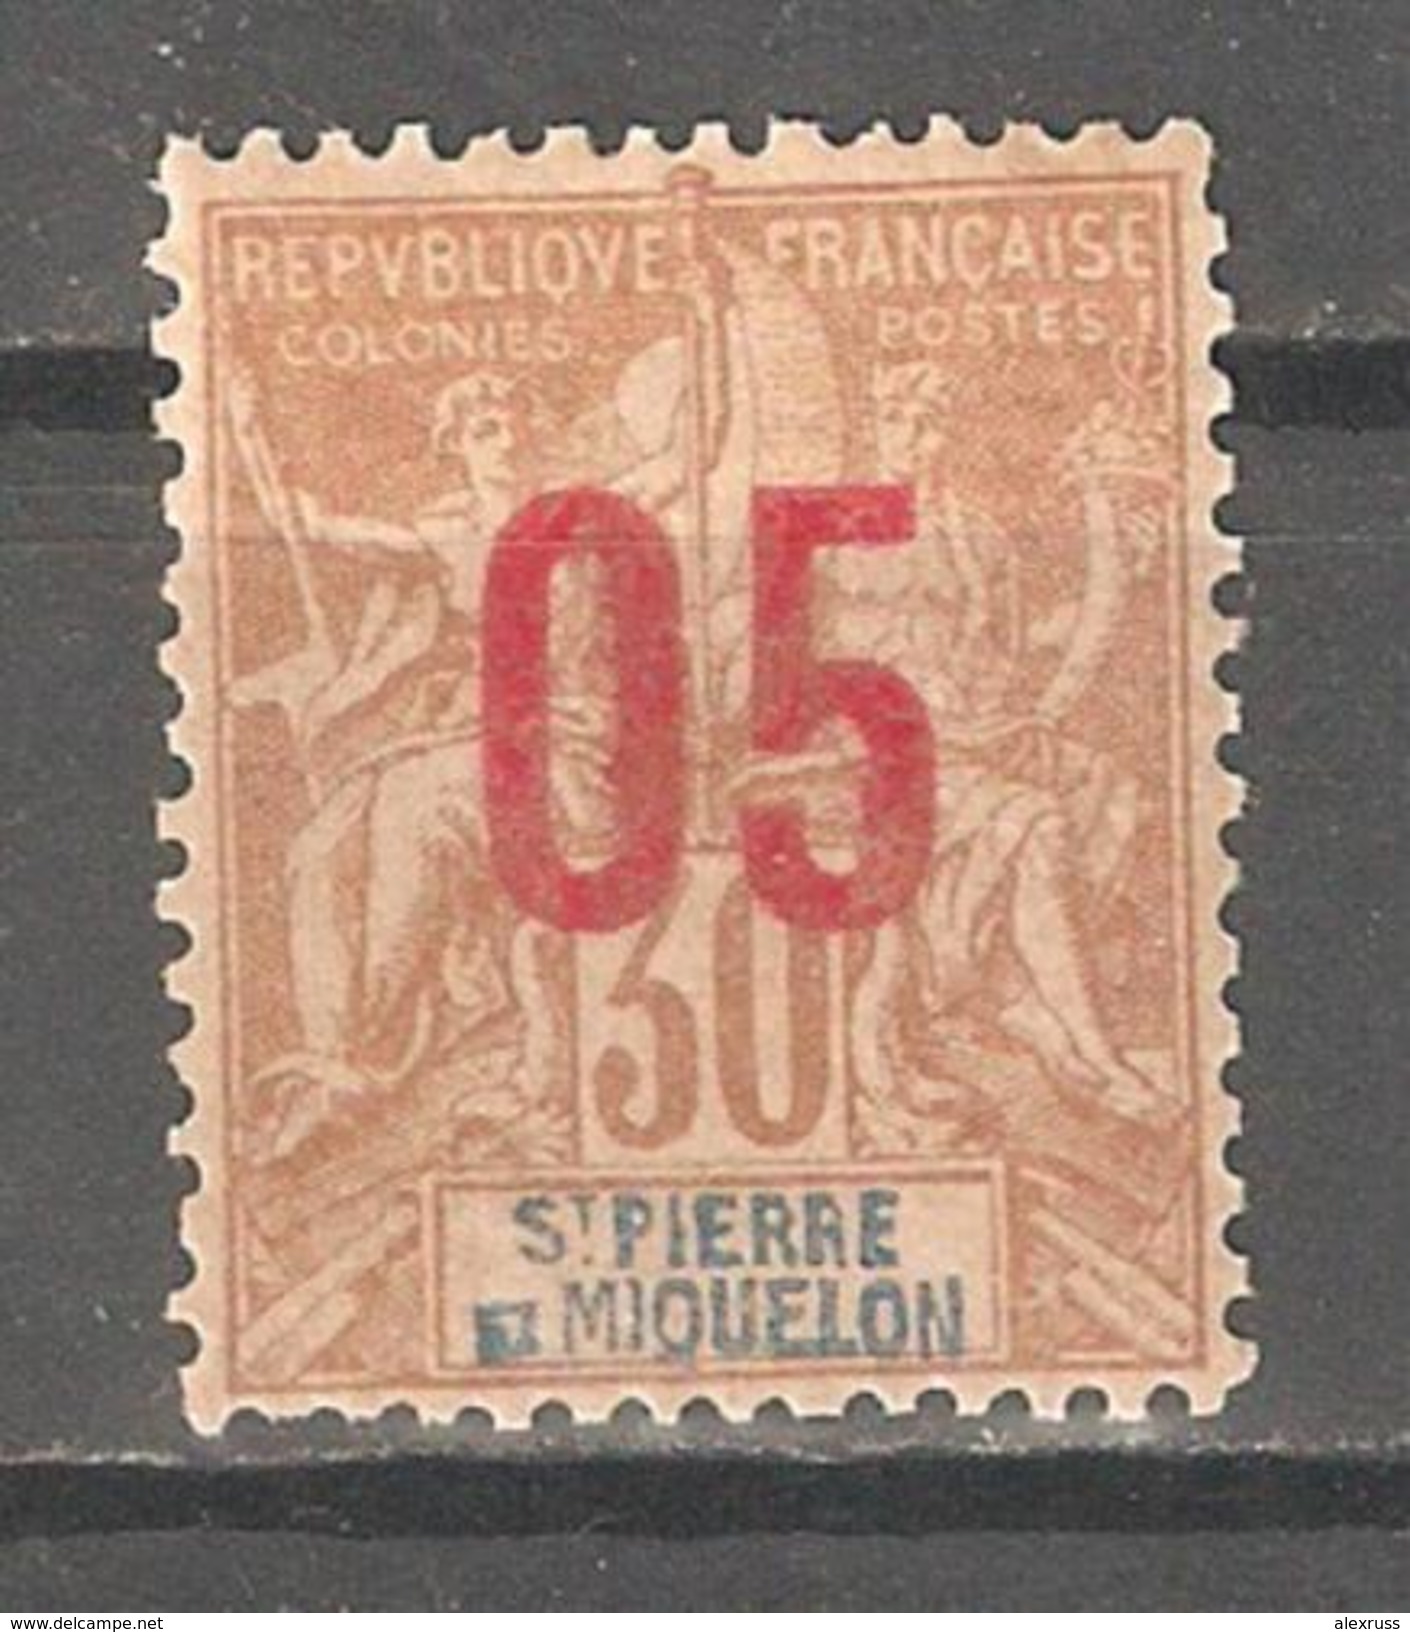 St Pierre & Miquelon 1912, Surcharged, Scott # 115, VF Mint Hinged*OG (P-5) - Unused Stamps